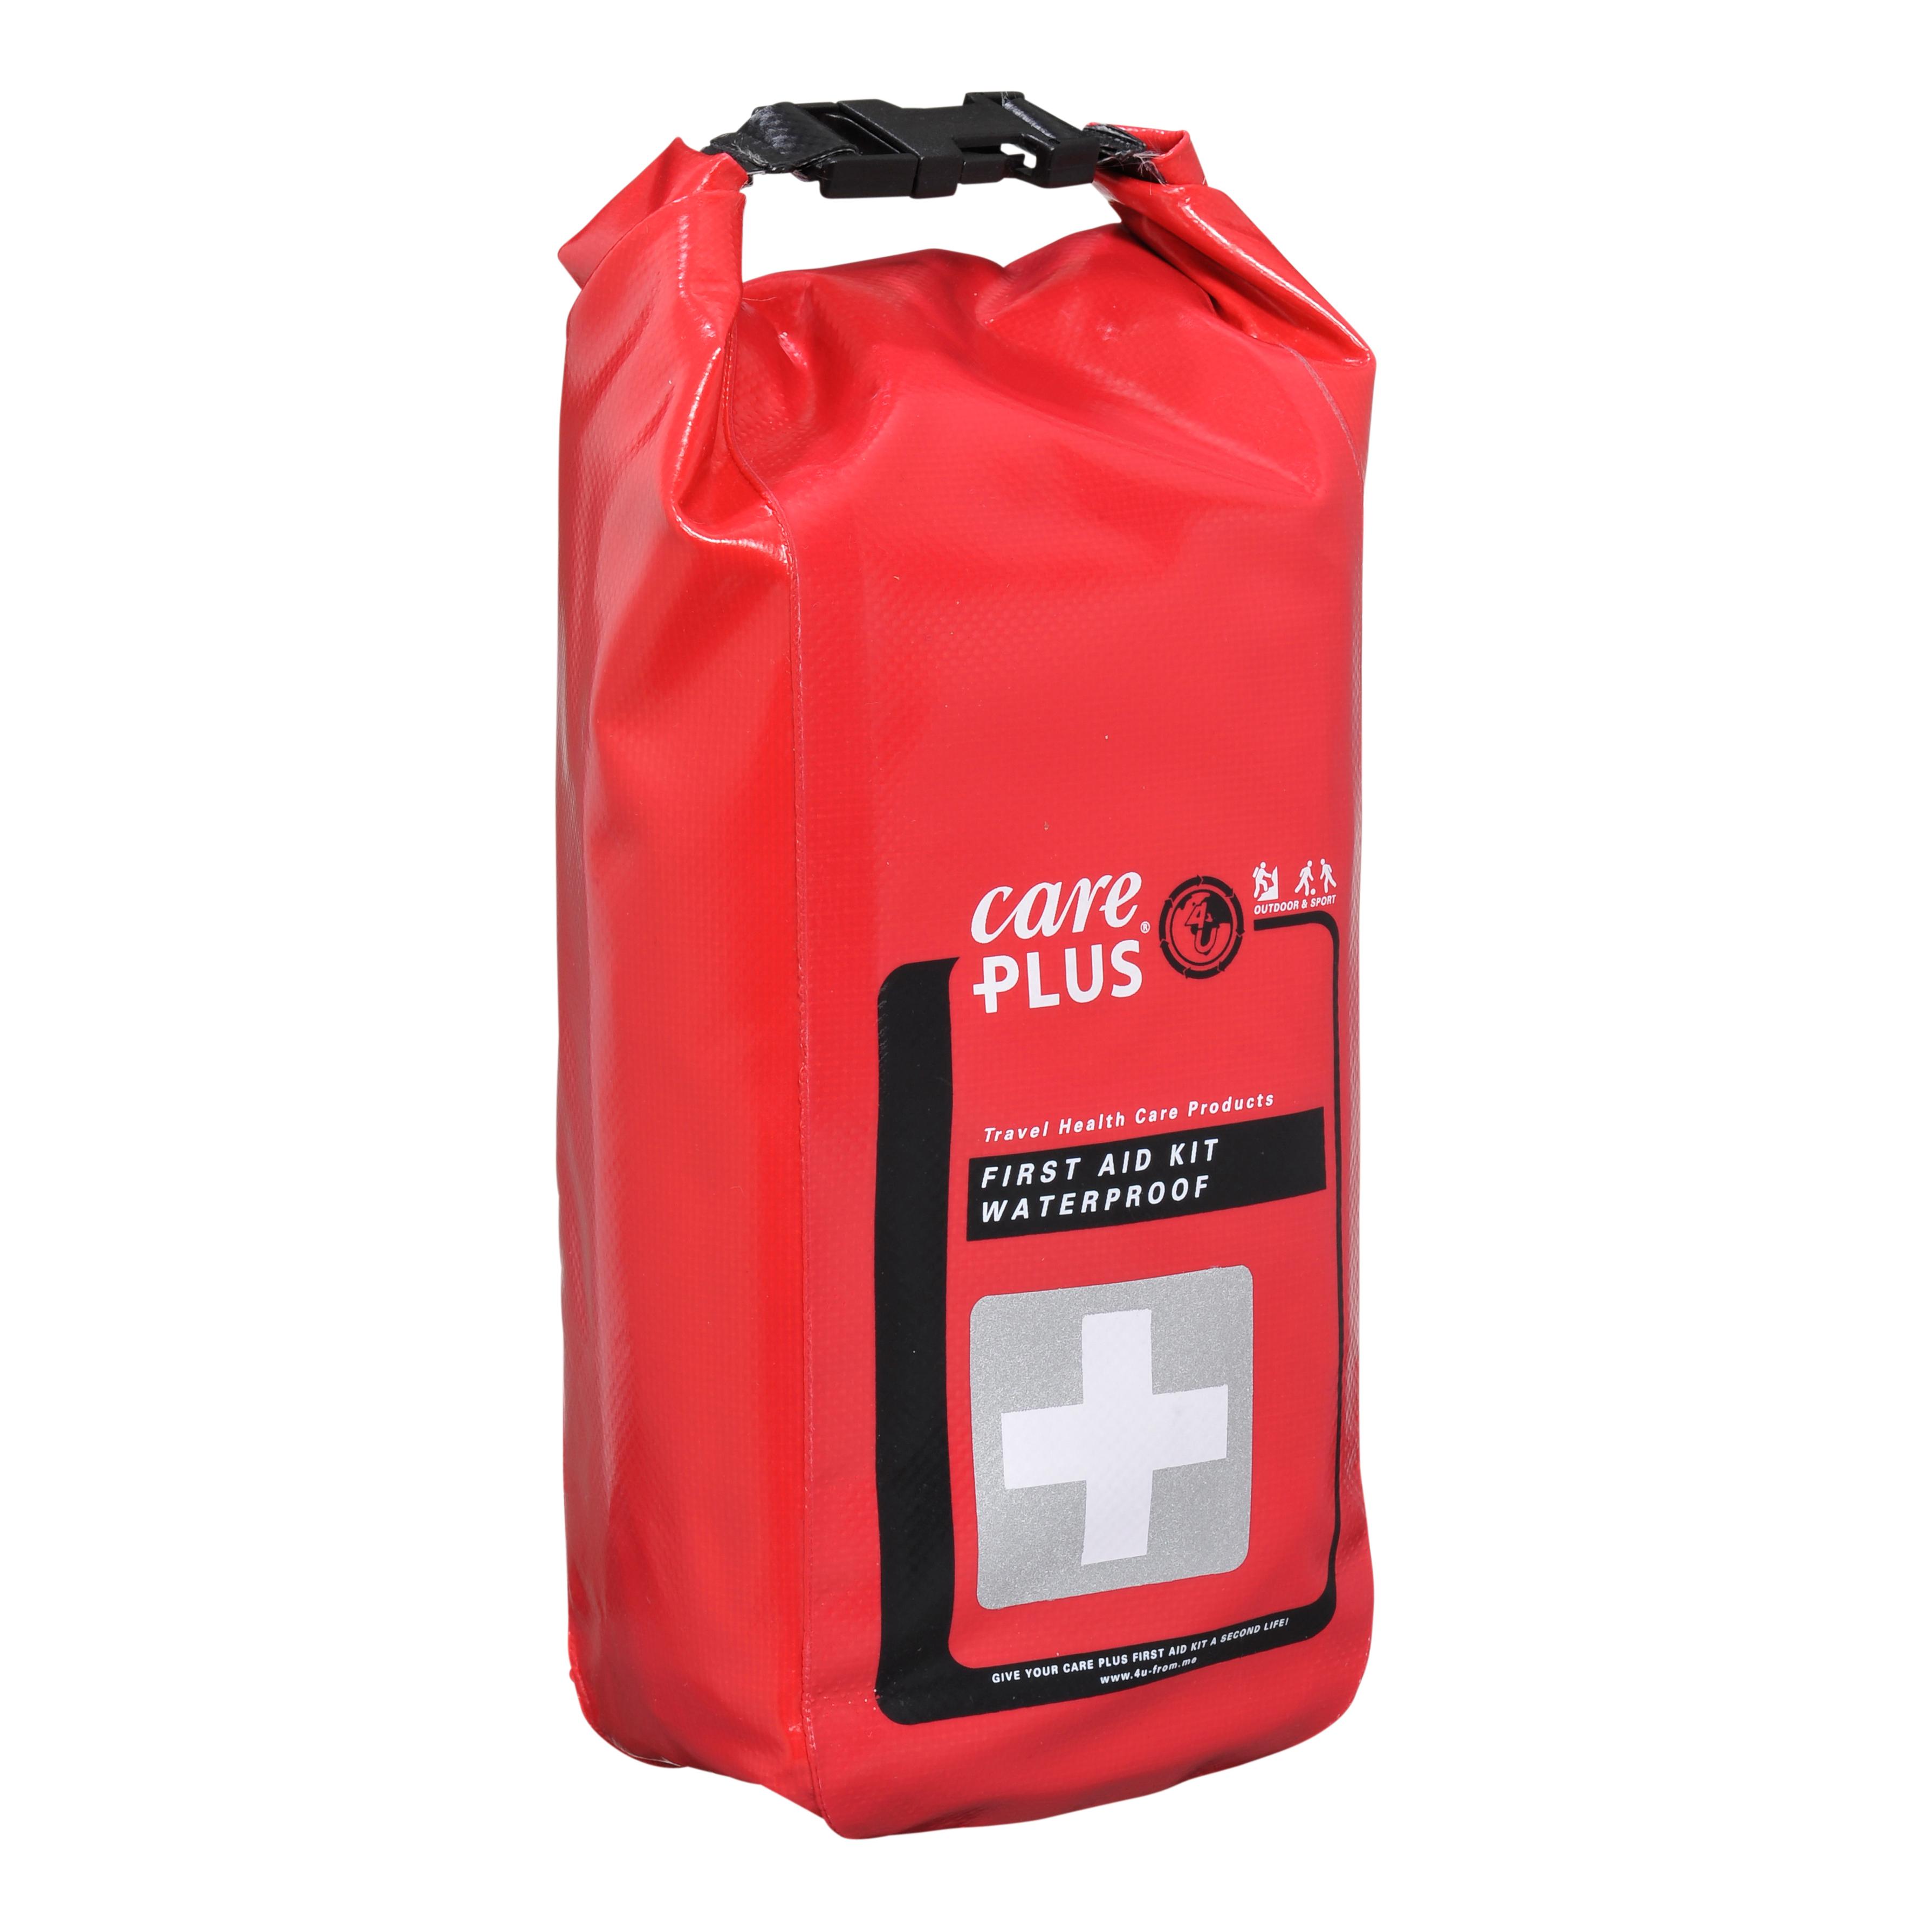 Care Plus First Aid Kit - Waterproof Rouge 